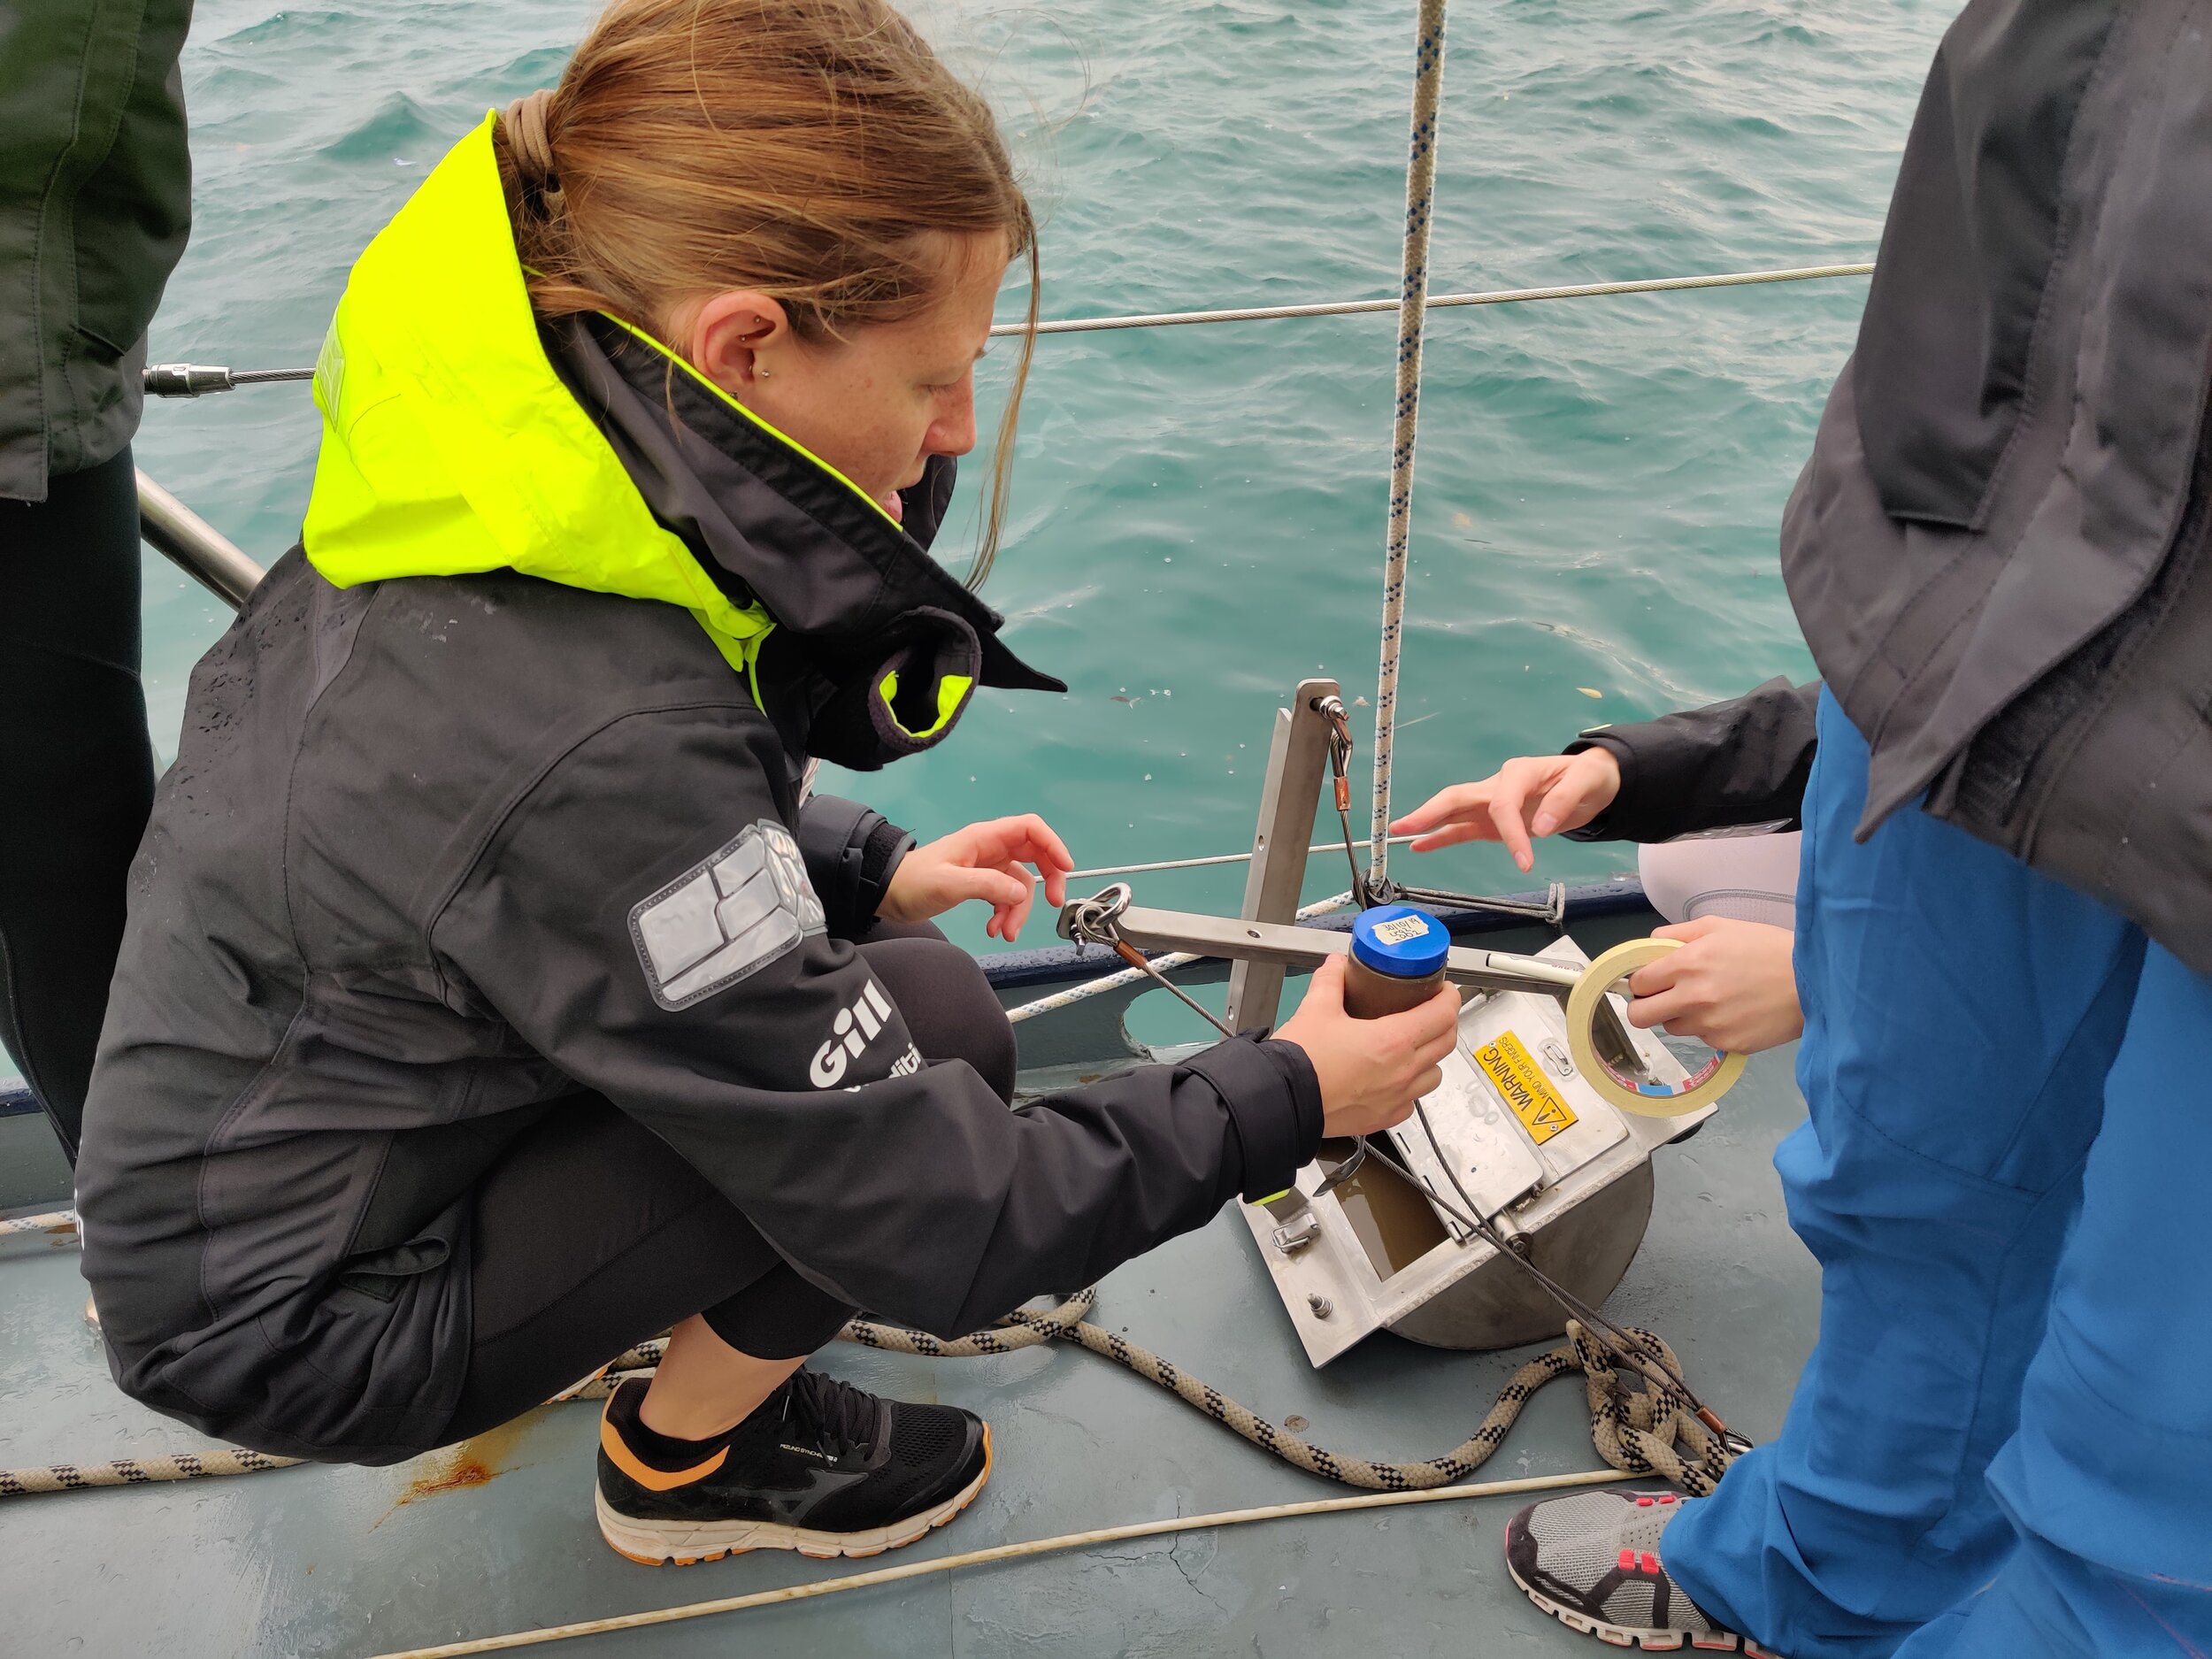 collecting sediment samples using the sediment grab in the Azores_credit Yanika Borg.jpg